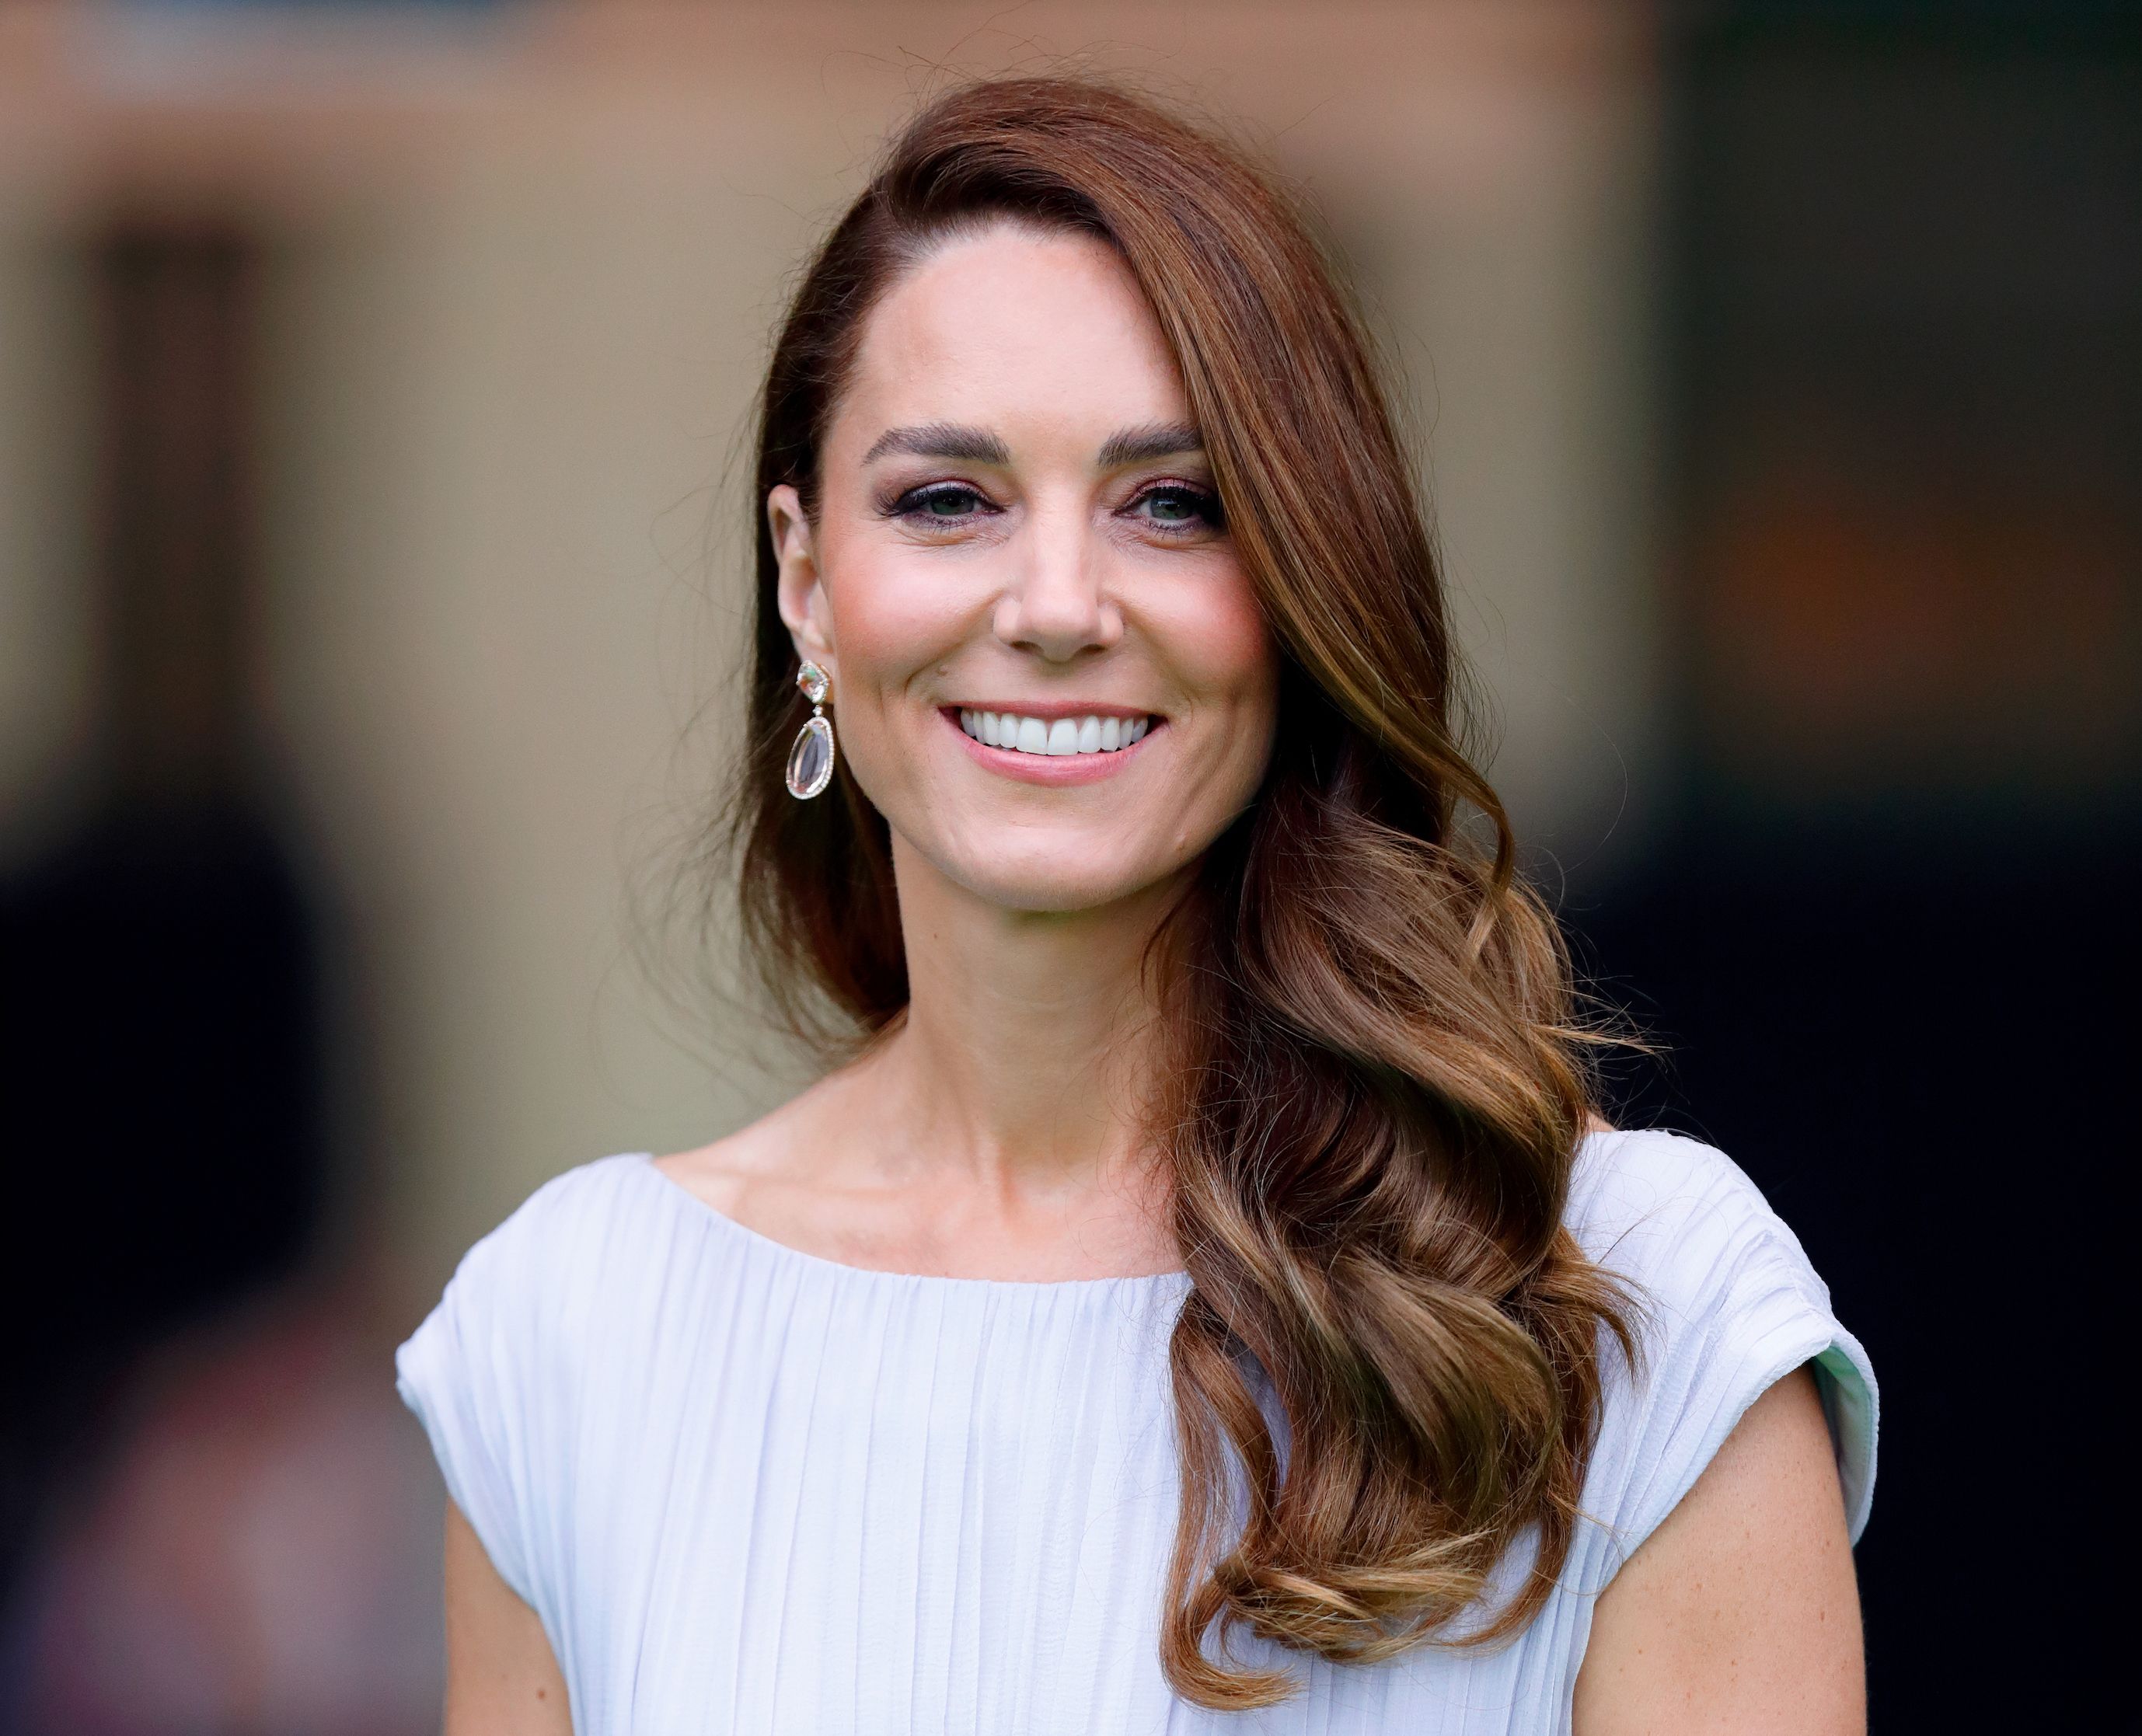 What Goes Into Kate Middleton's Breakfast Smoothie?